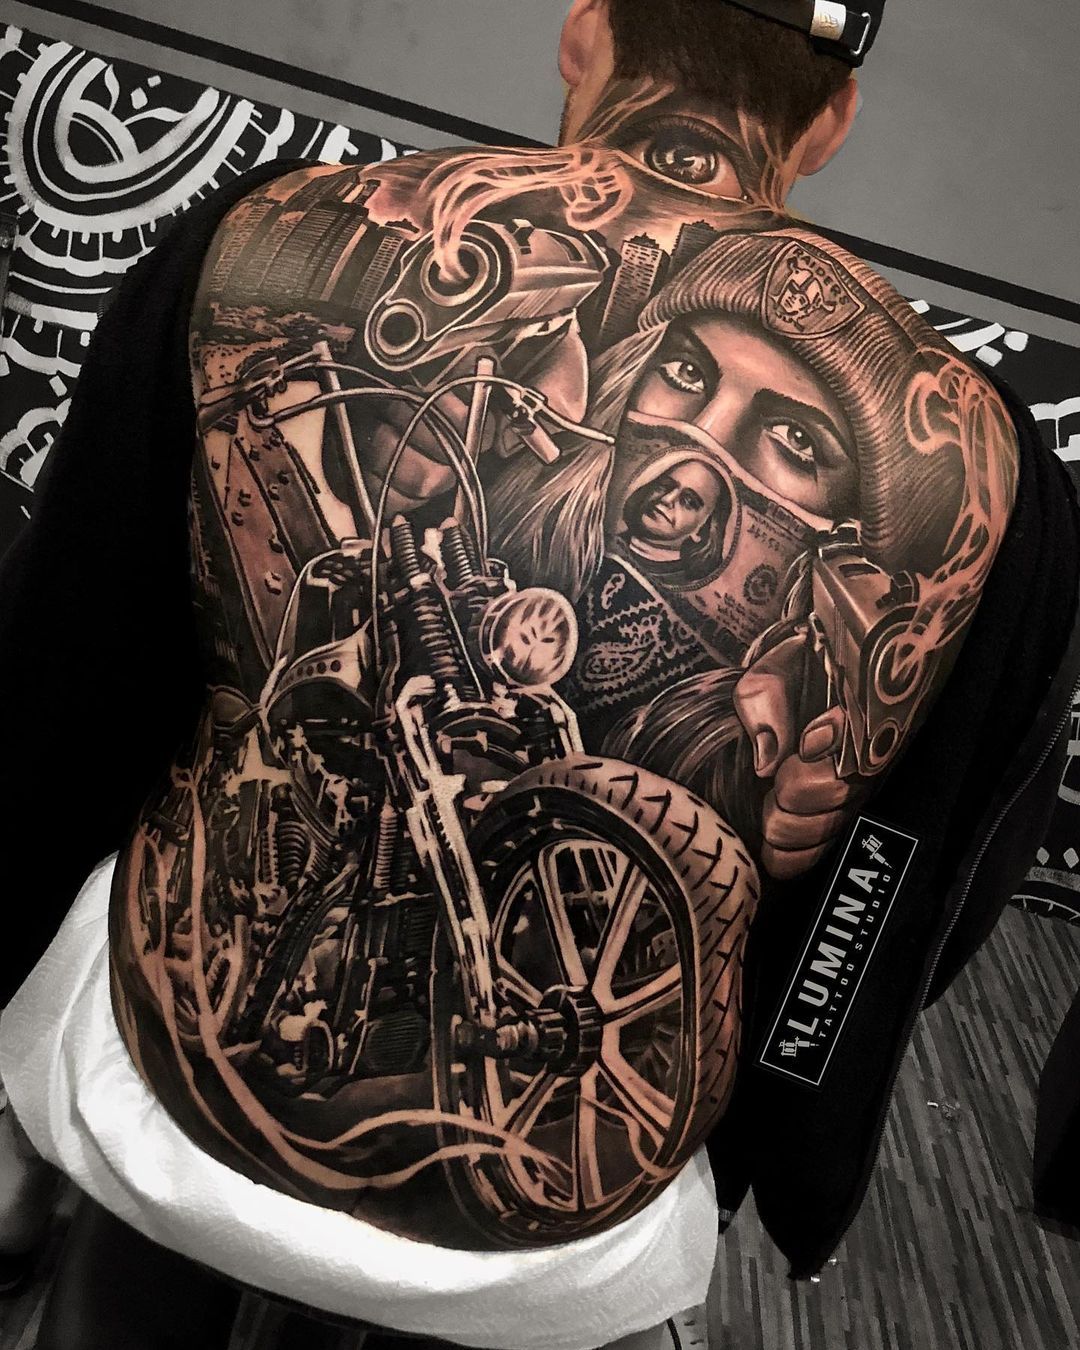 Share 66+ gangster back tattoos - in.cdgdbentre